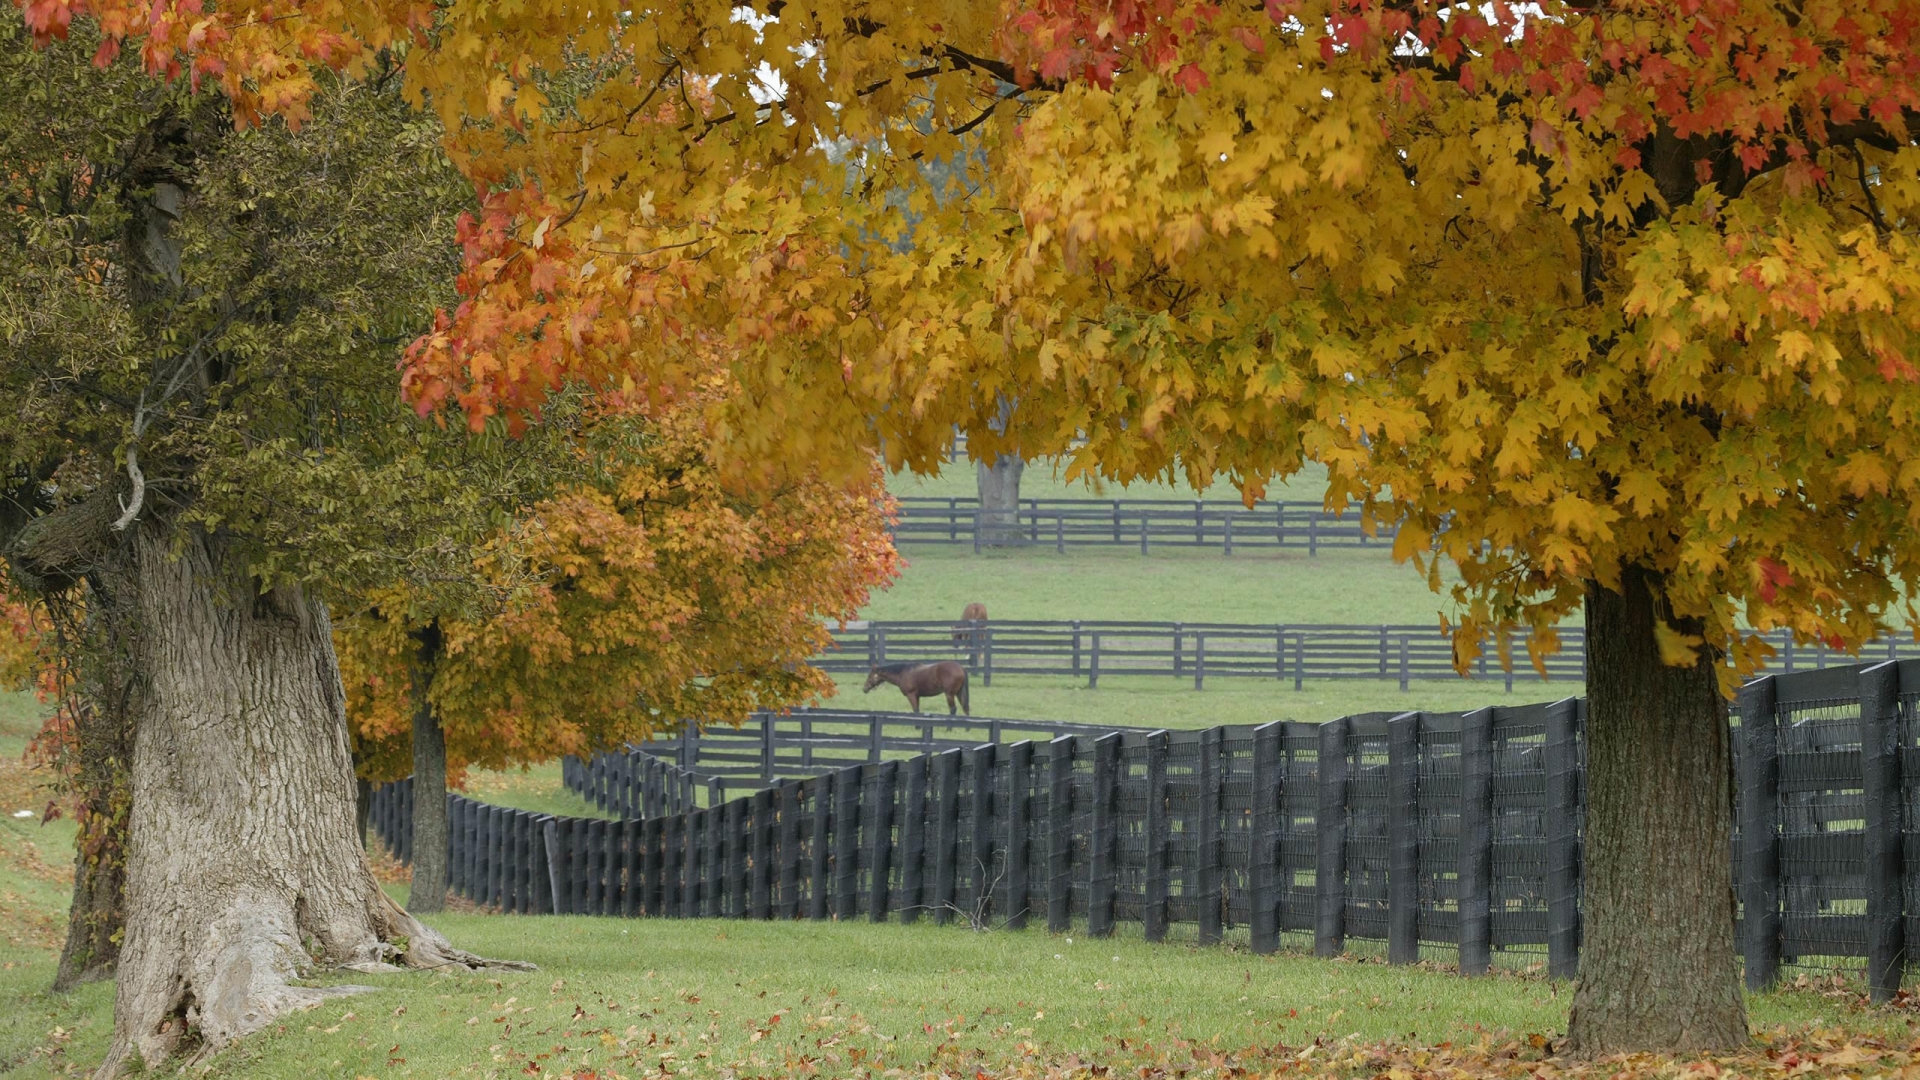 Wallpapers trees horses fence on the desktop